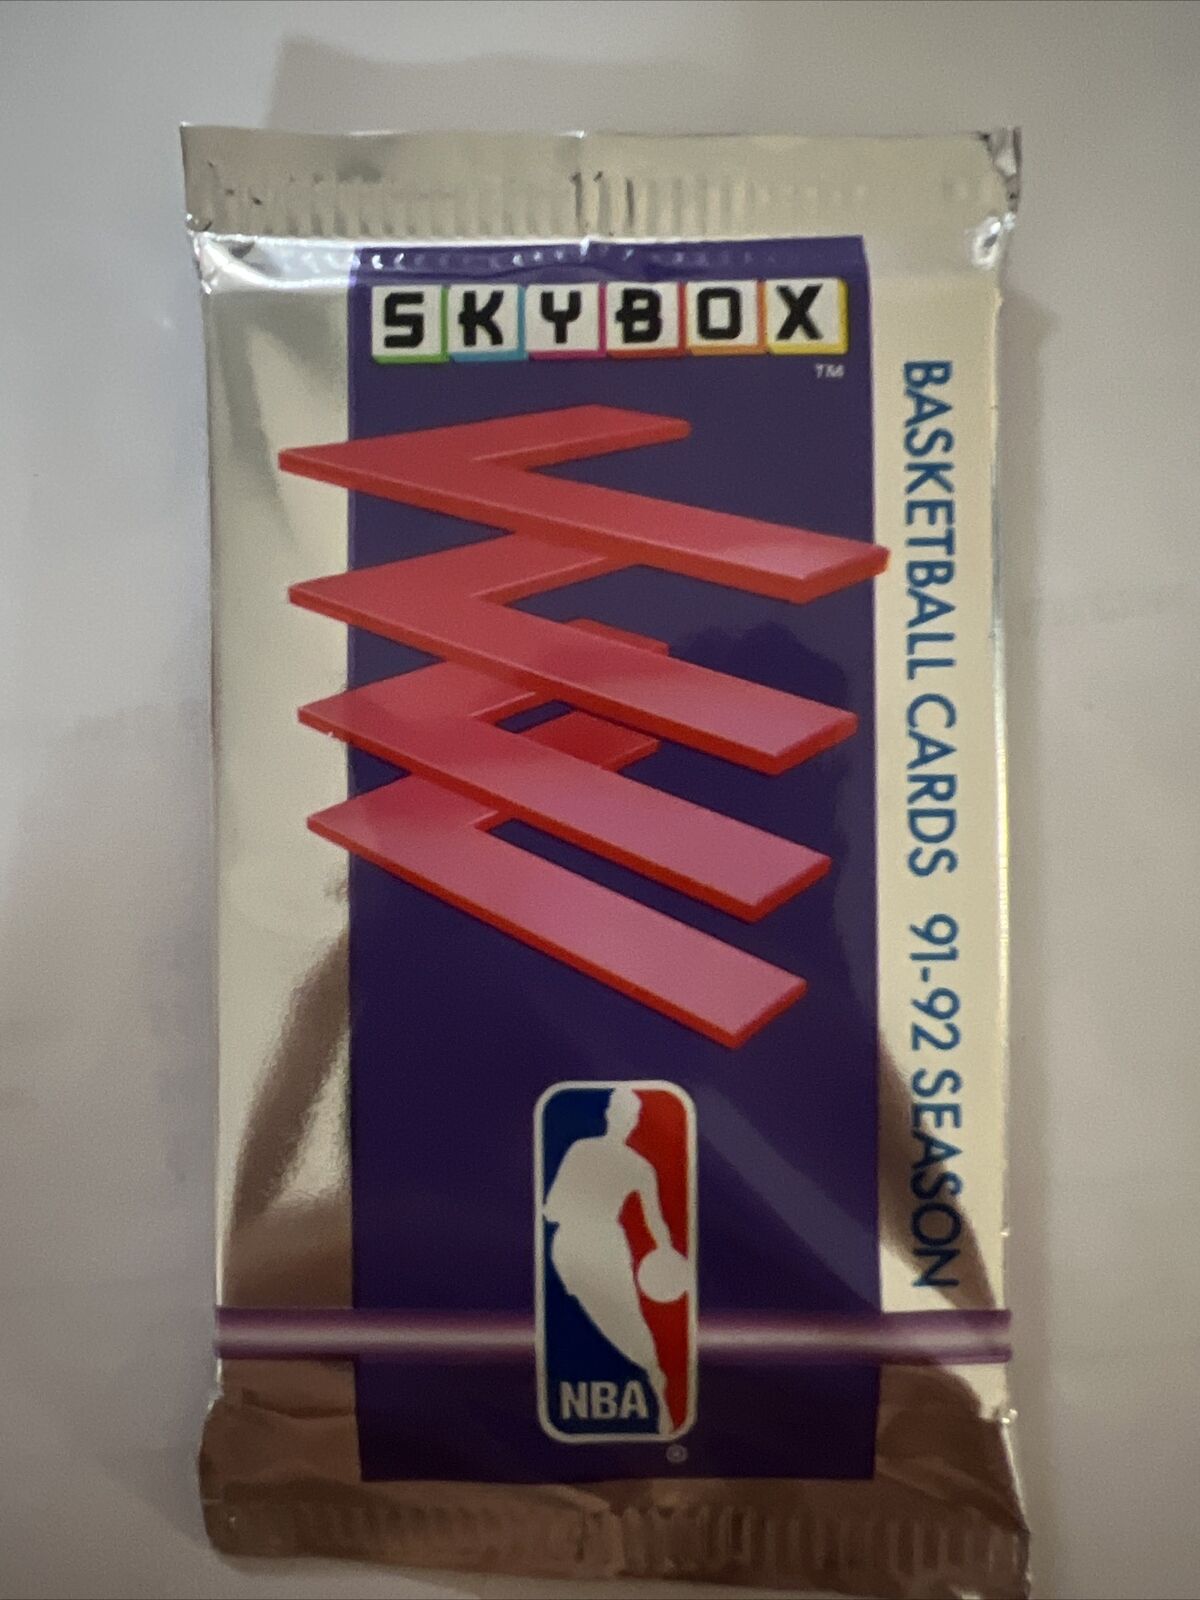 nba trading card packs 1991-1992. Very High Potential to Luck Up